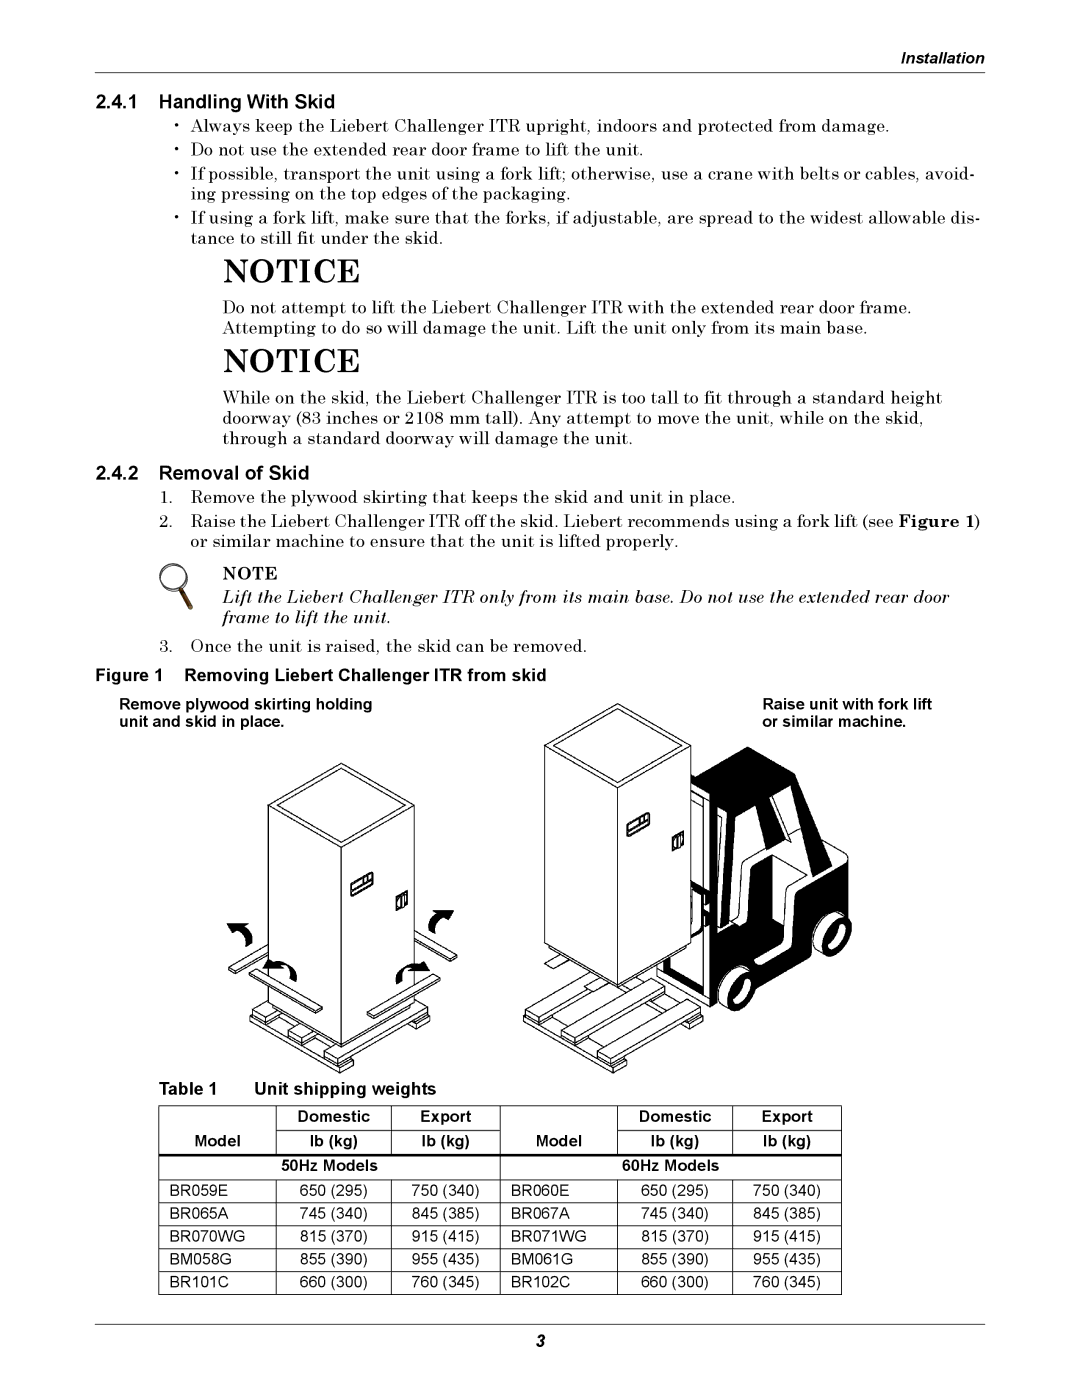 Liebert ITR installation manual Handling With Skid, Removal of Skid, Unit shipping weights 